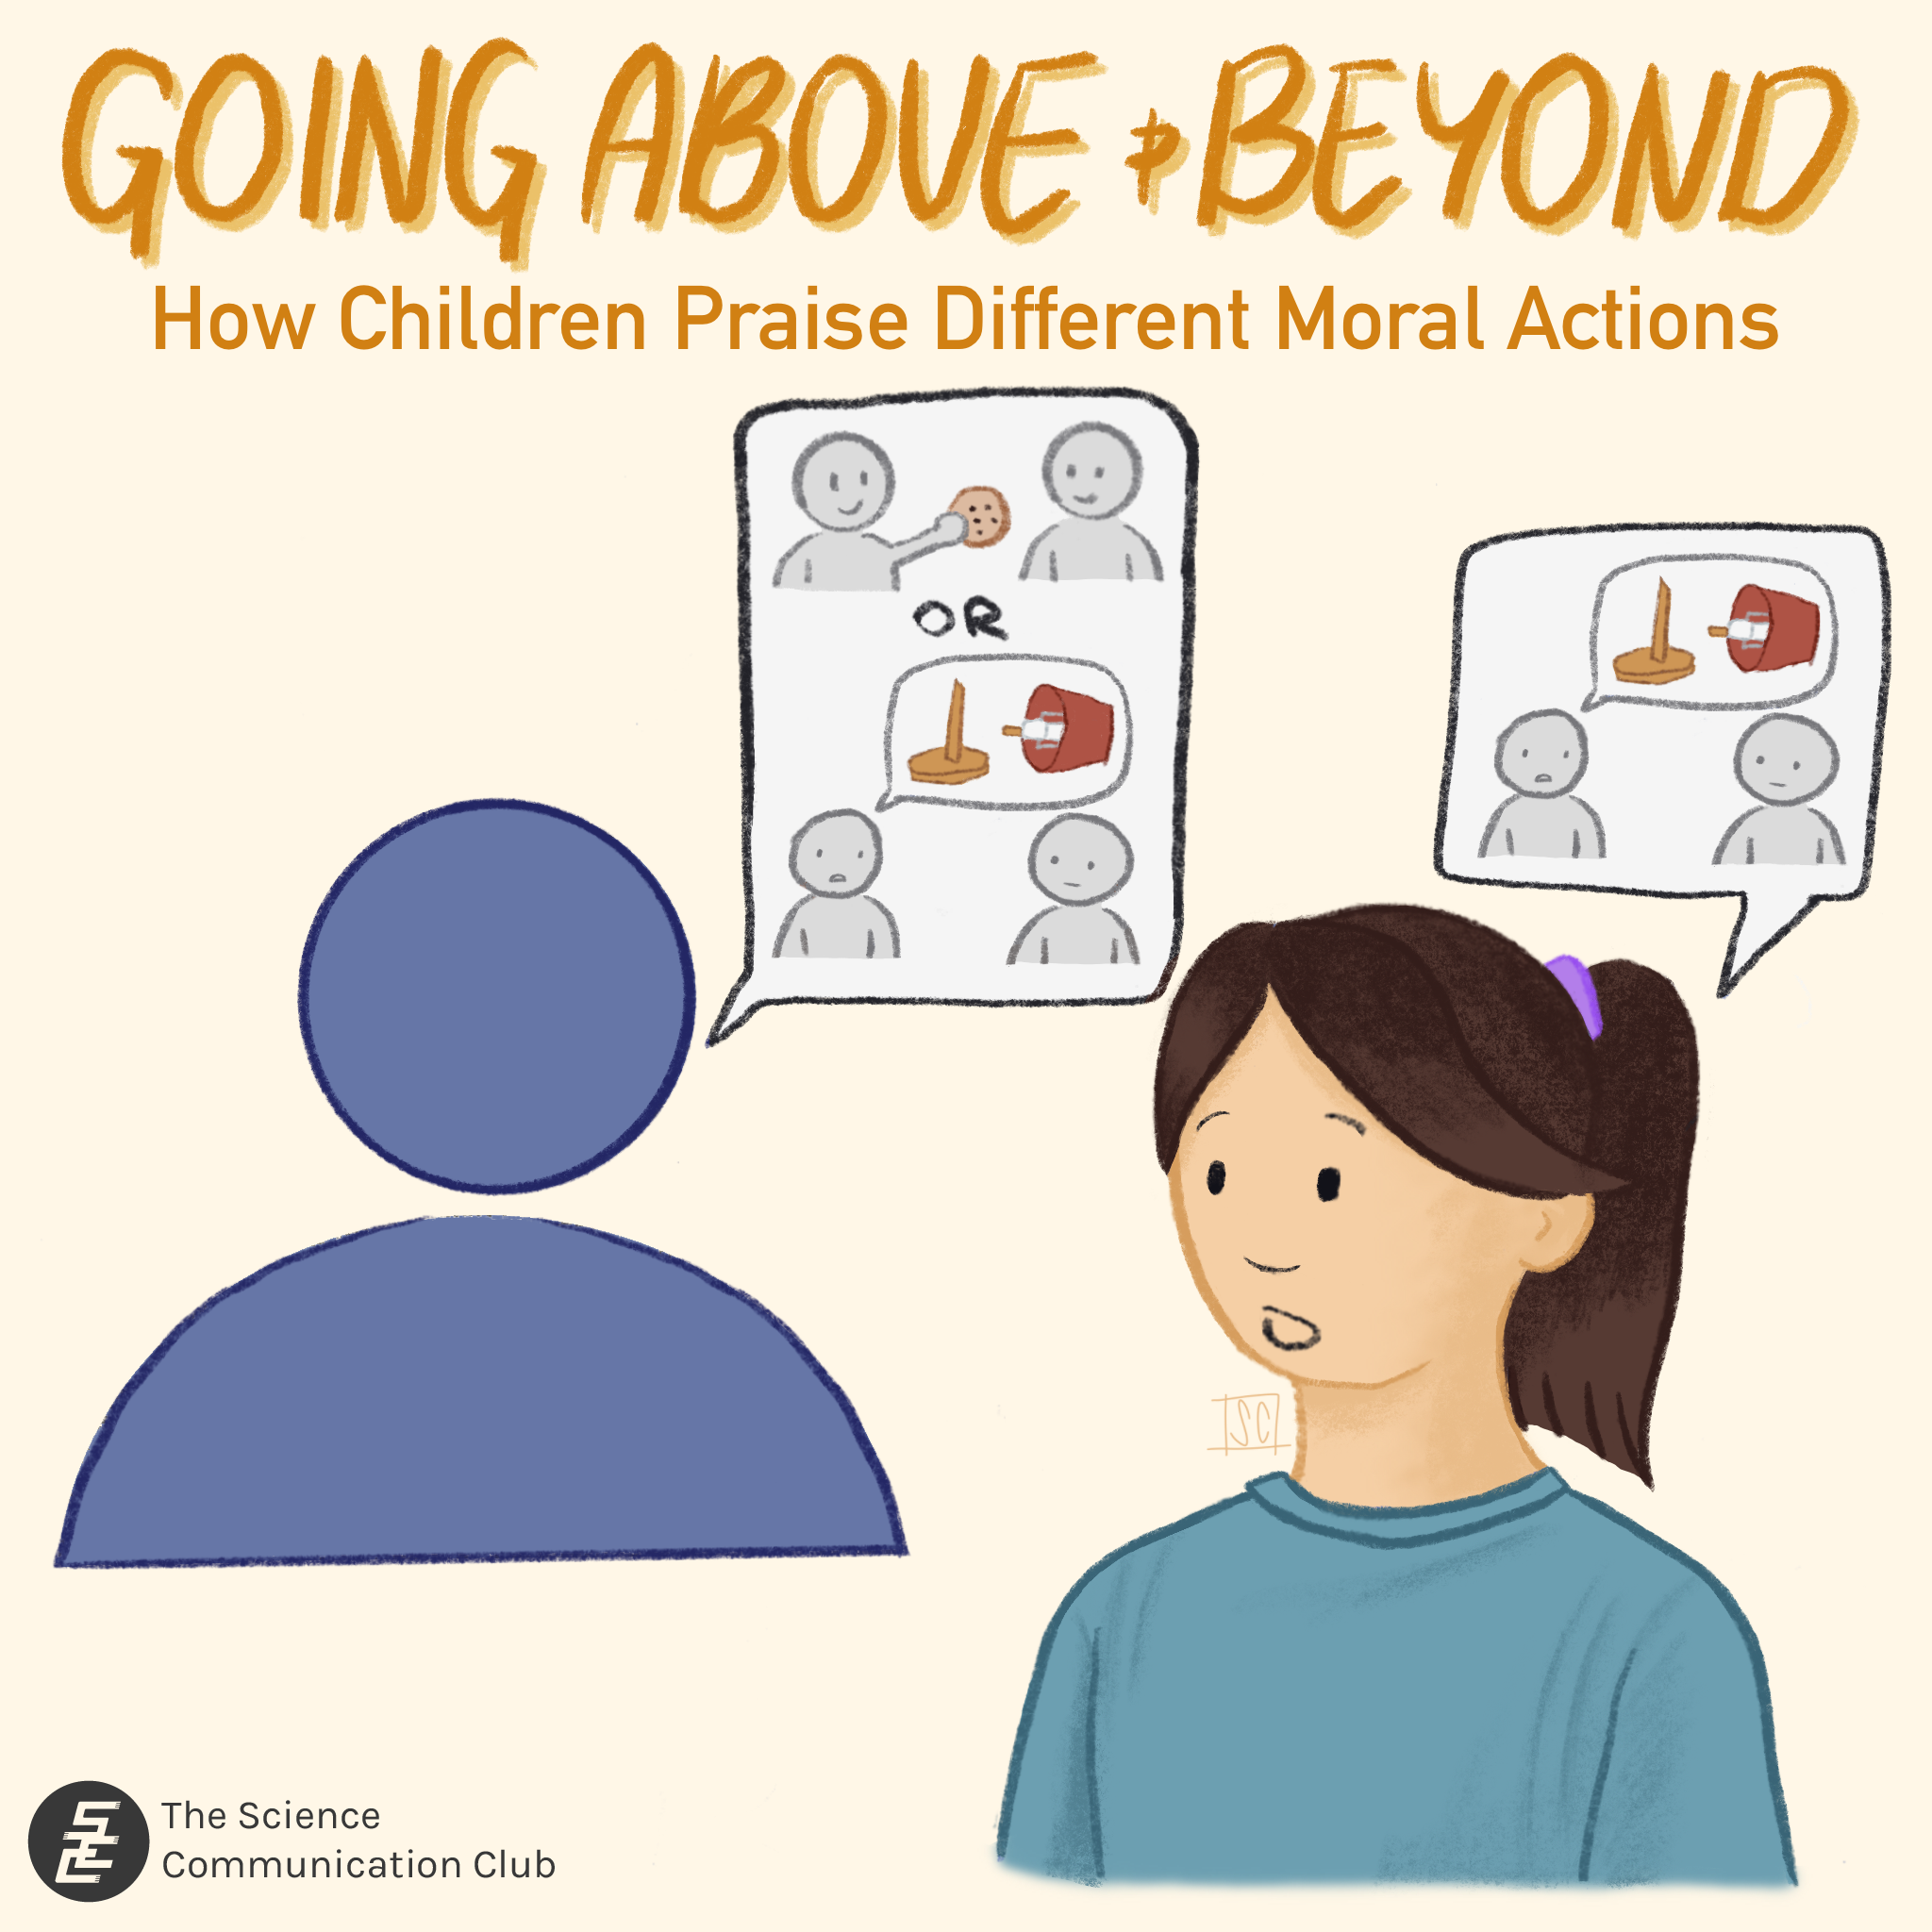 Title says “Going above and beyond: how children praise different moral actions.” Below shows a faceless figure with a speech bubble. The speech bubble has two children sharing a cookie and a person telling someone they broke a lamp. Next to the faceless figure is a girl with a speech bubble containing a person telling someone they broke a lamp.